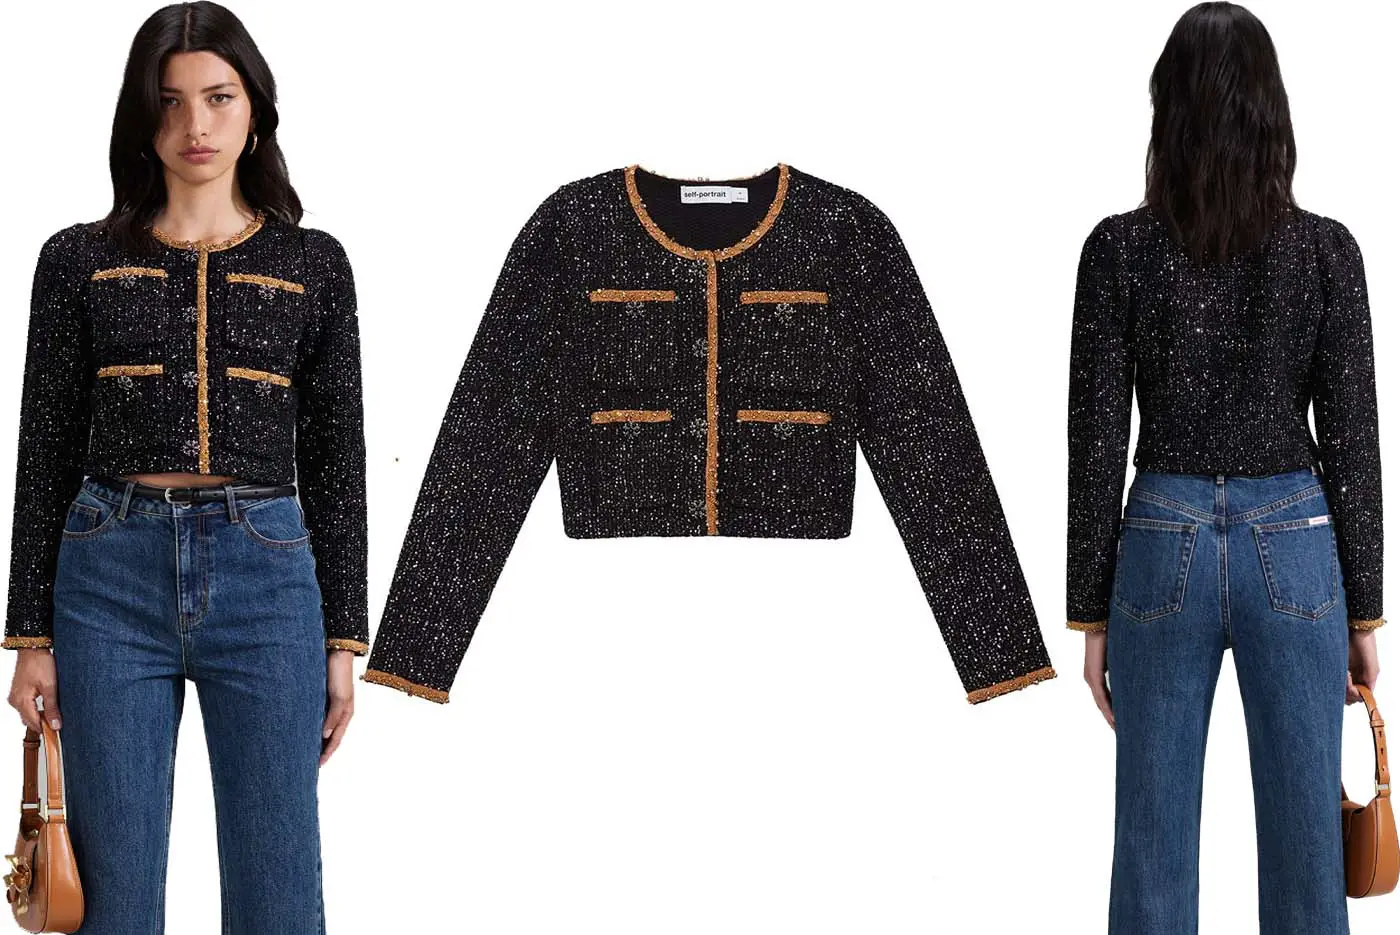 The Princess of Wales wore Self Portrait Sequin Knit Crop Cardigan